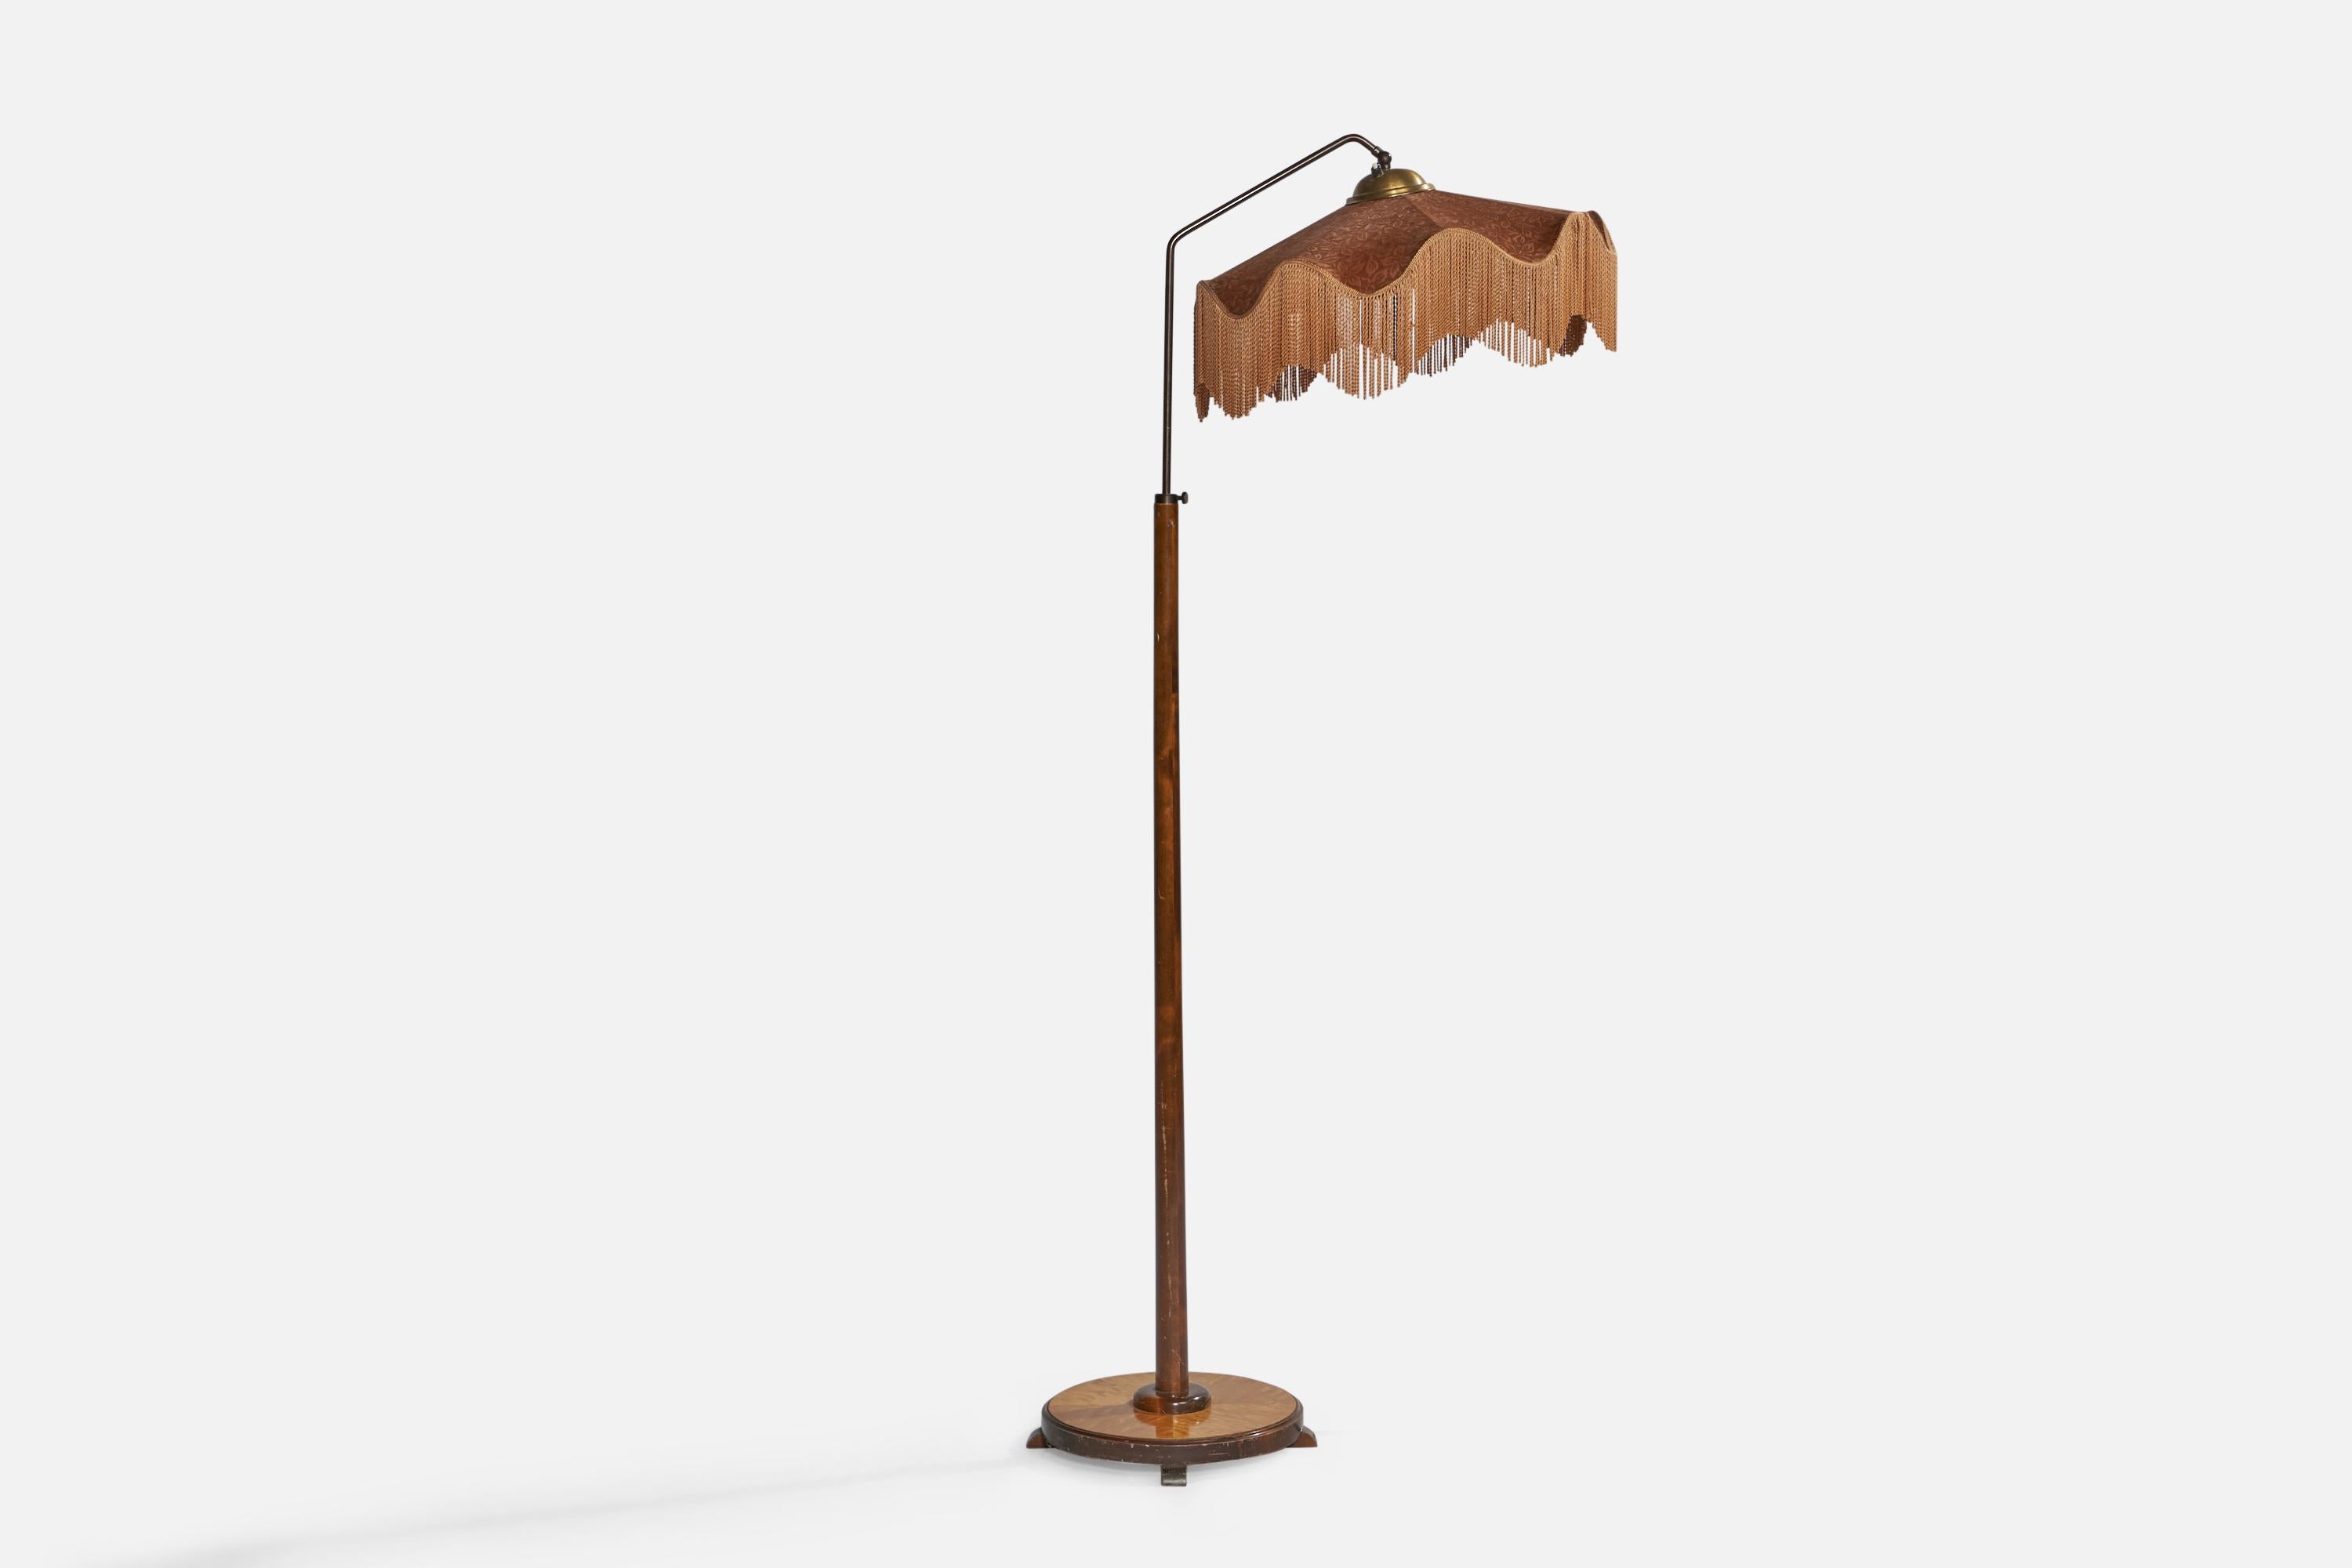 An adjustable brass, birch and fabric floor lamp designed and produced in Sweden, c. 1930s.

Overall Dimensions (inches): 65” H x 29” W x 21” D. Stated dimensions include shade.
Bulb Specifications: E-26 Bulb
Number of Sockets: 1
All lighting will